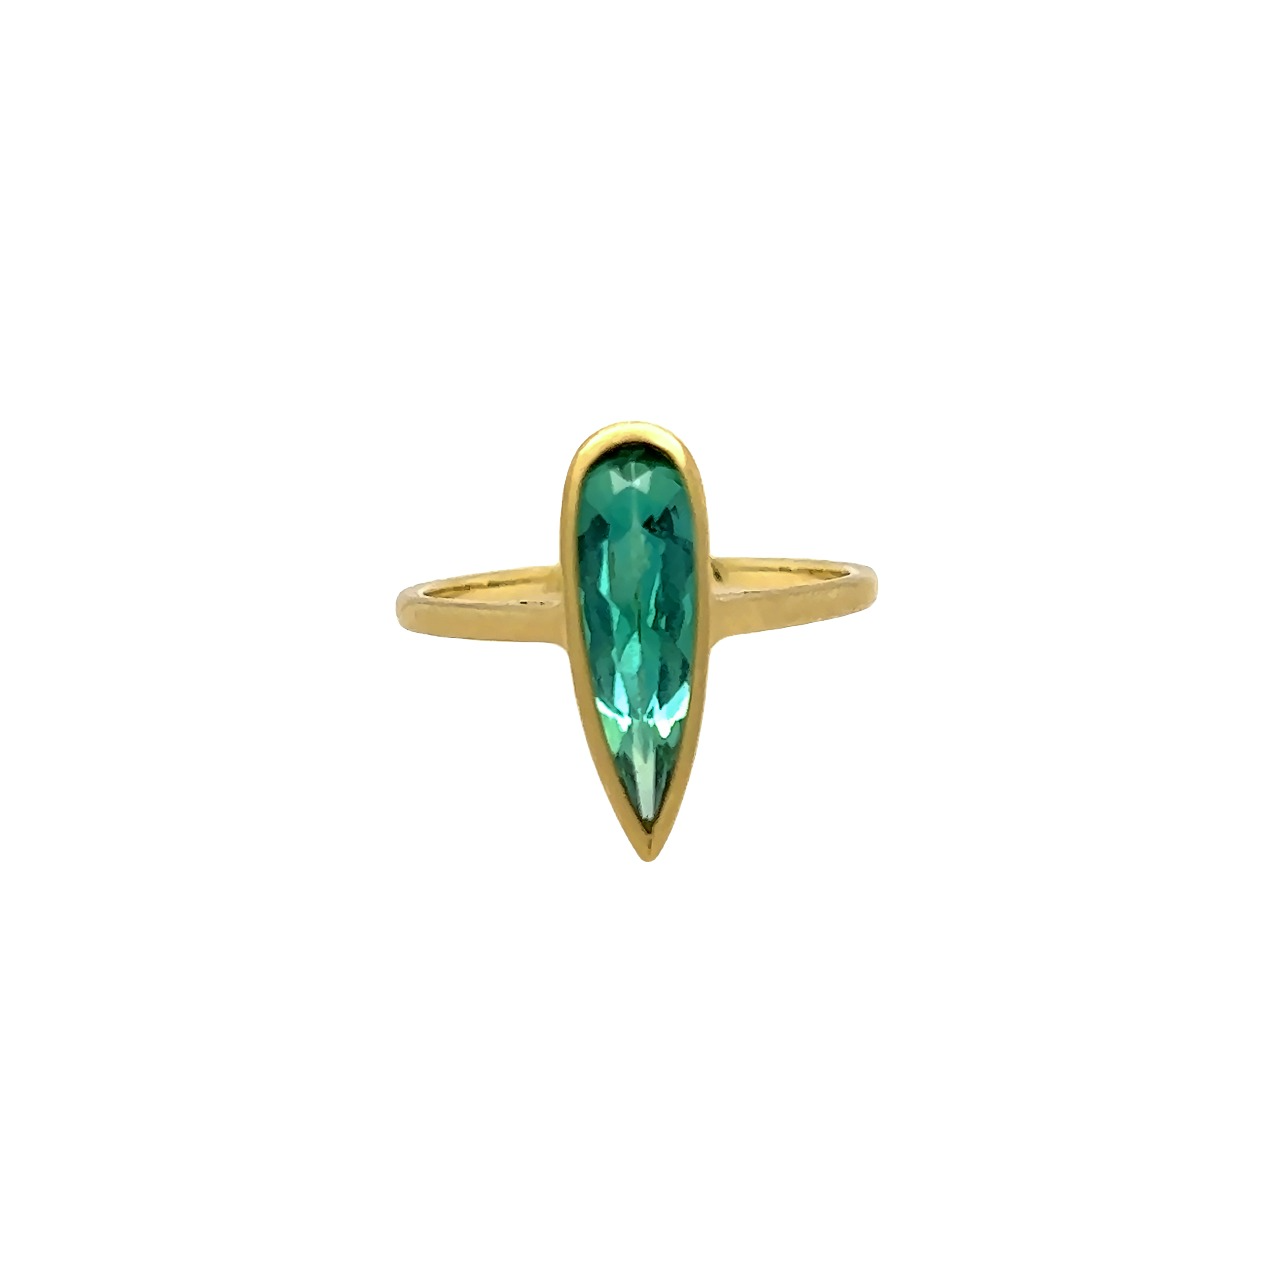 Featured image for “One of a Kind  Green Tourmaline Teardrop Ring”